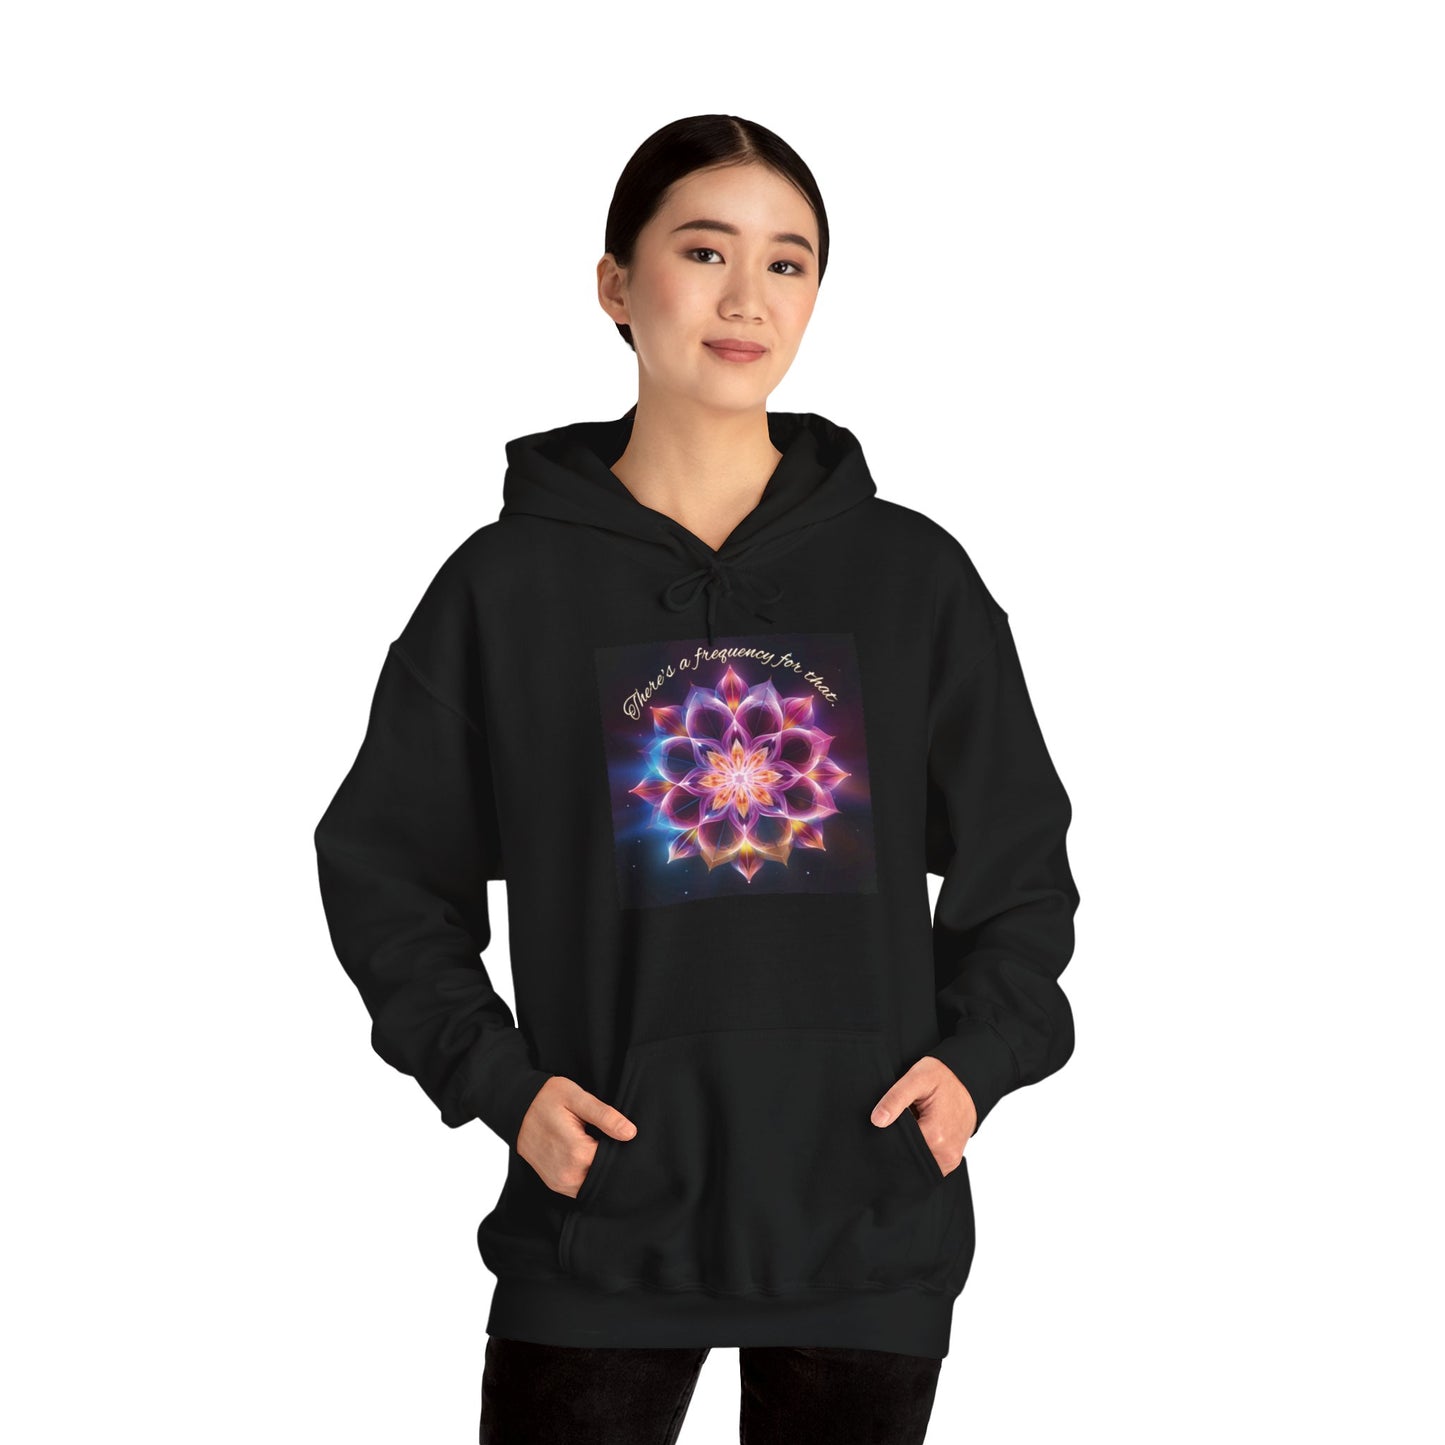 There's A Frequency For That (Full Image) Unisex Heavy Blend™ Hooded Sweatshirt